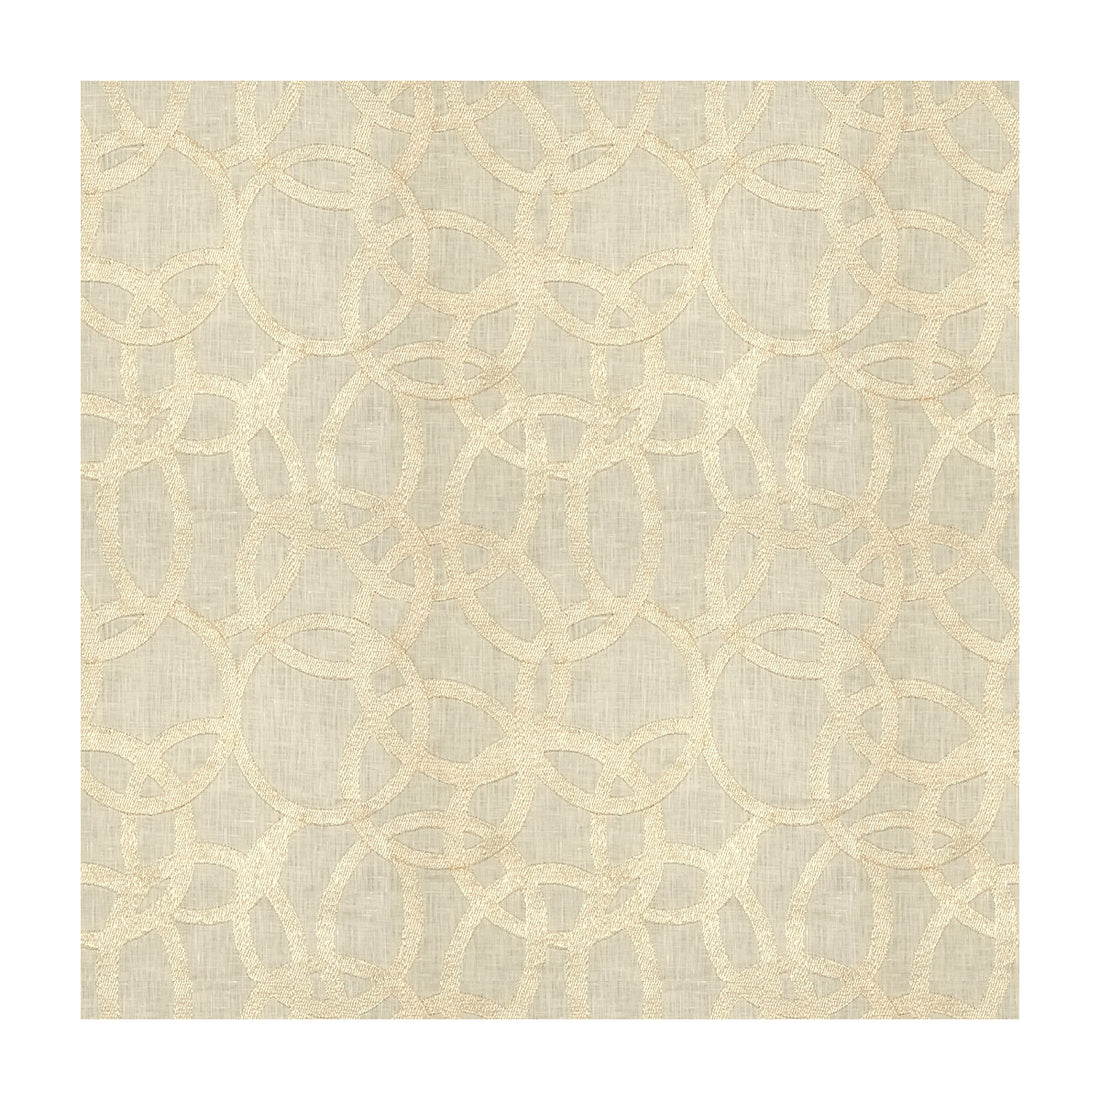 Keep Shining fabric in white gold color - pattern 3971.1.0 - by Kravet Couture in the Modern Luxe collection